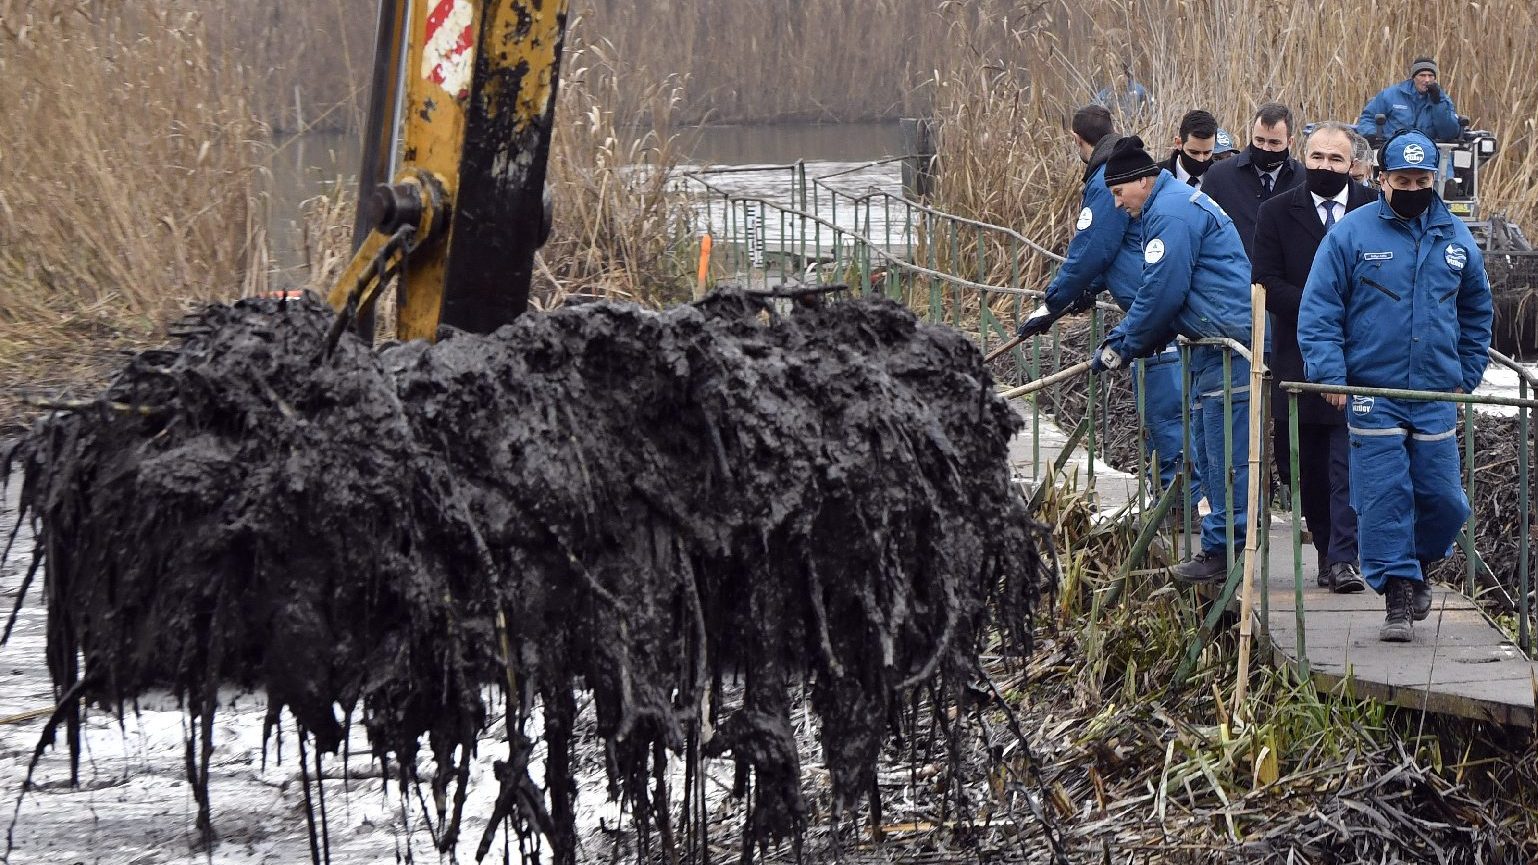 The Danube Bank in Szigetszentmiklós will take another decade to restore the pre-oil pollution state.